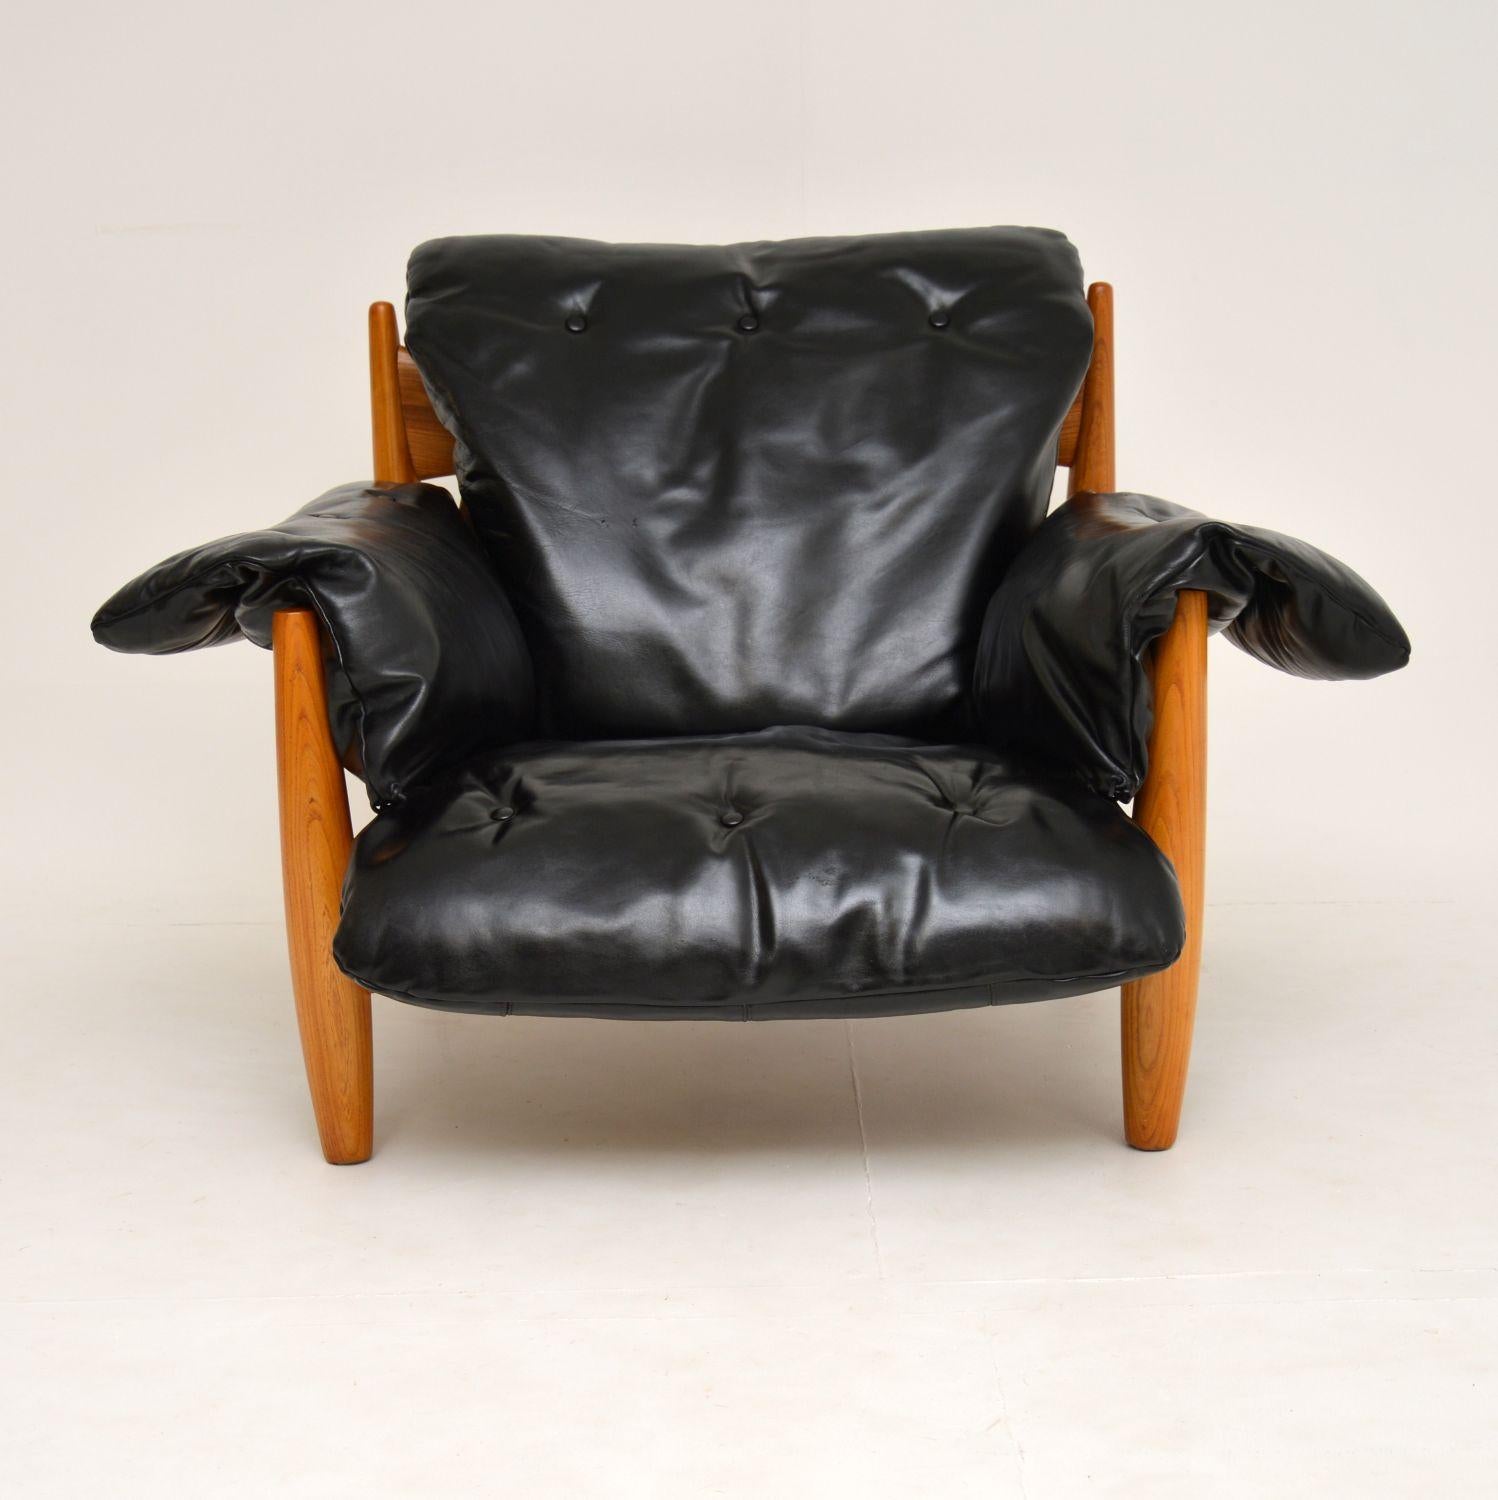 A stunning and iconic vintage leather armchair, this was designed by the famous Brazilian Sergio Rodrigues. It was made by ISA in Italy, and this dates from the 1960s.

We obtained this privately from an artists residence in London, and we have